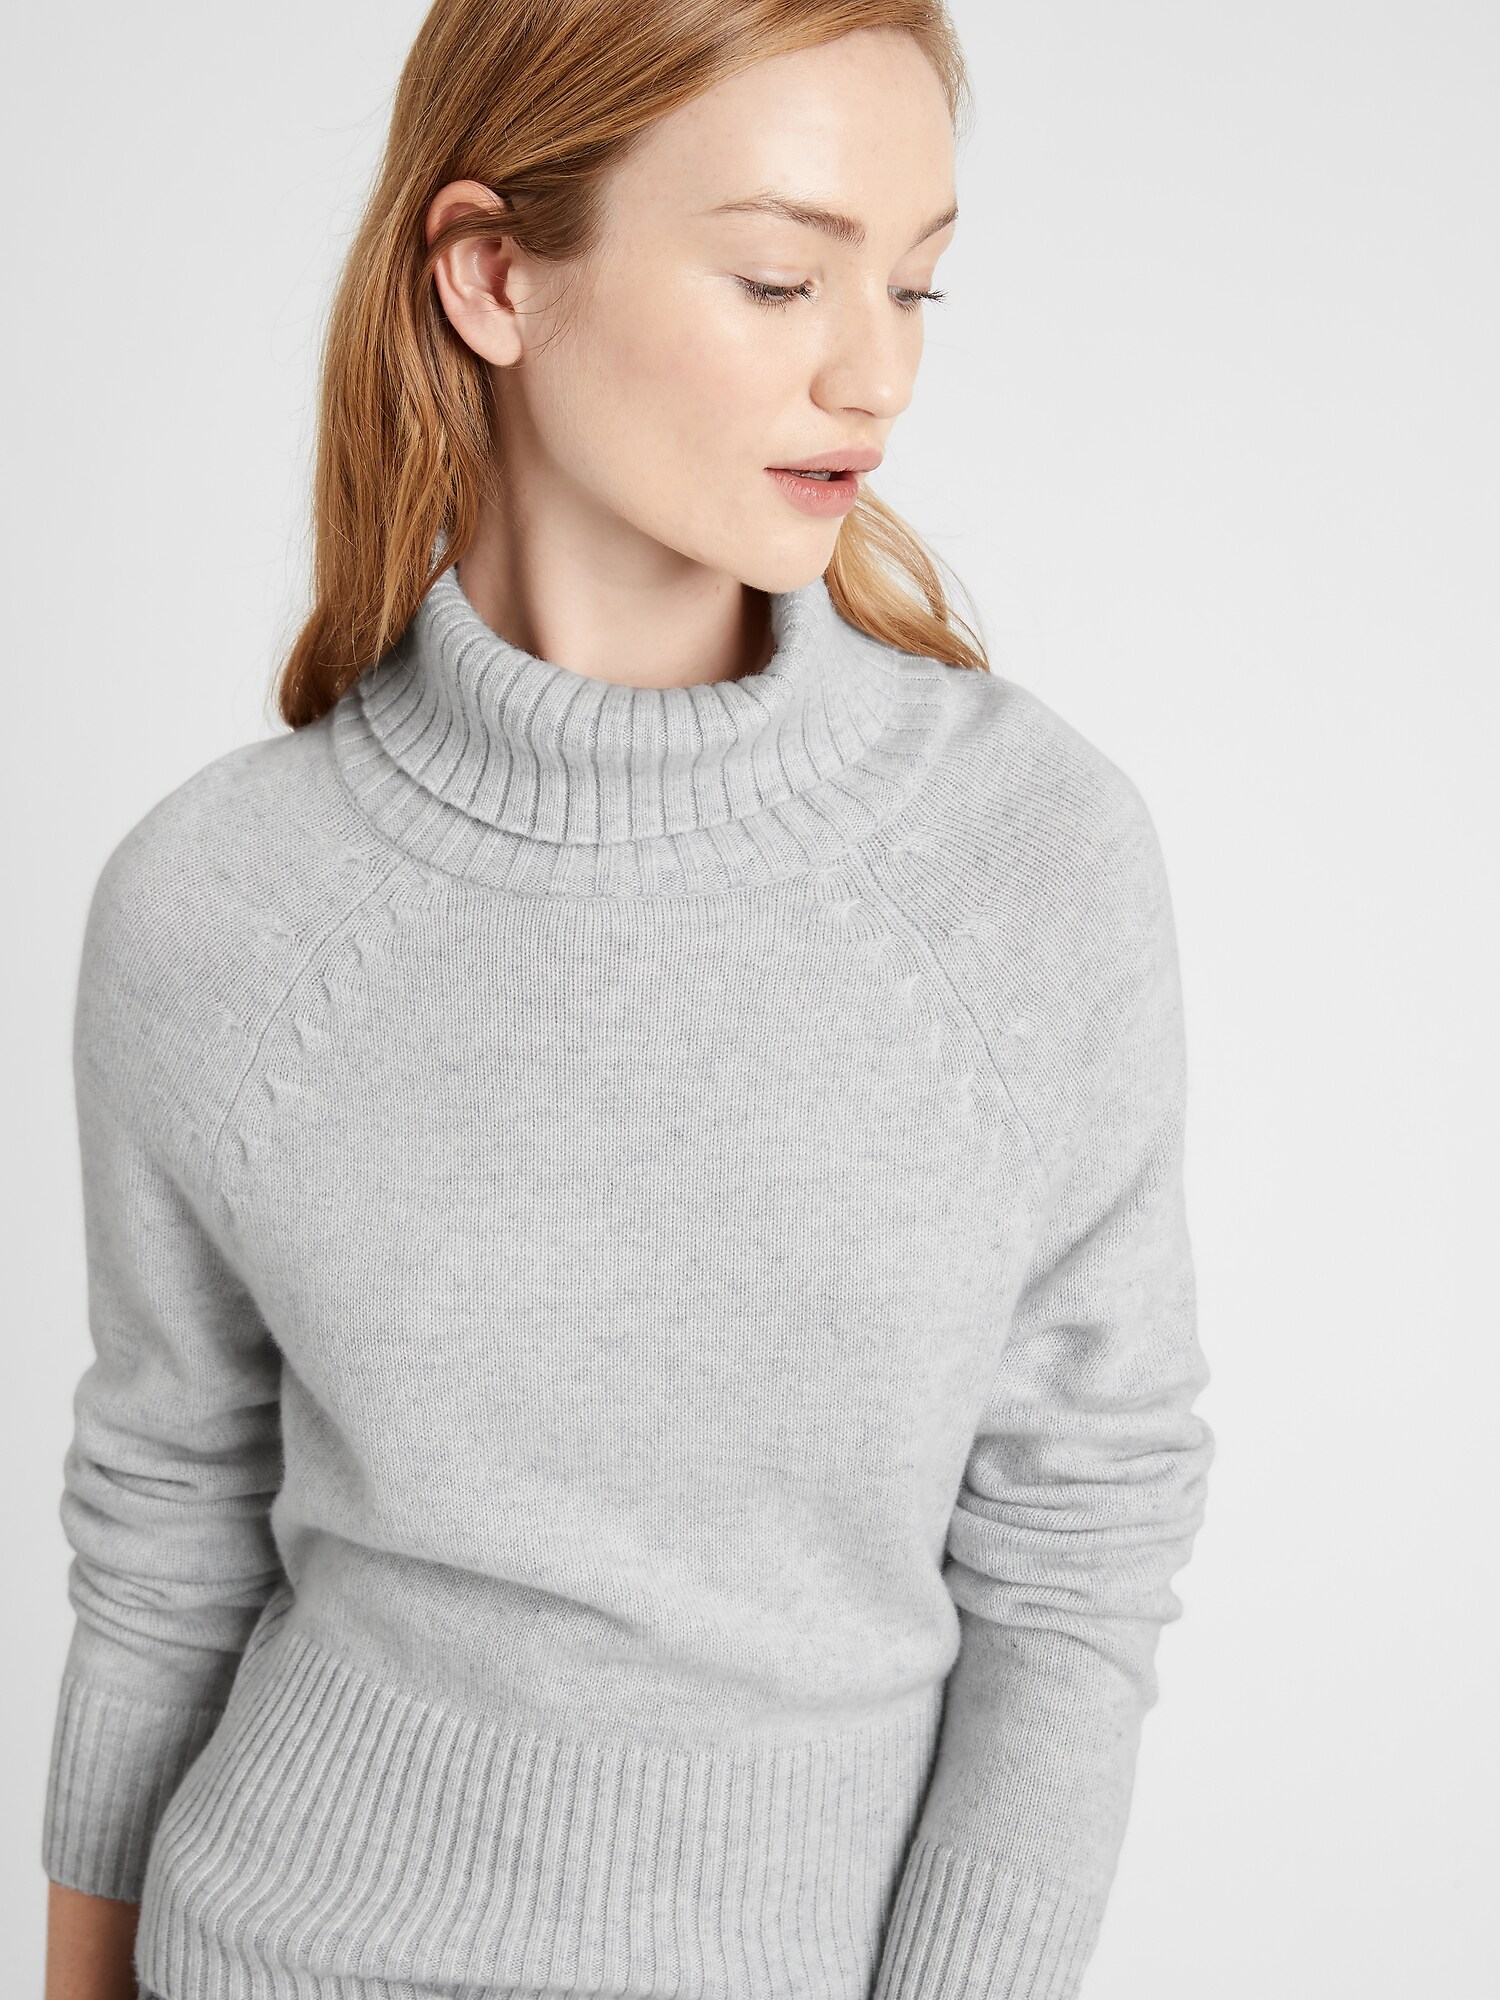 Cashmere Turtleneck Cropped Sweater